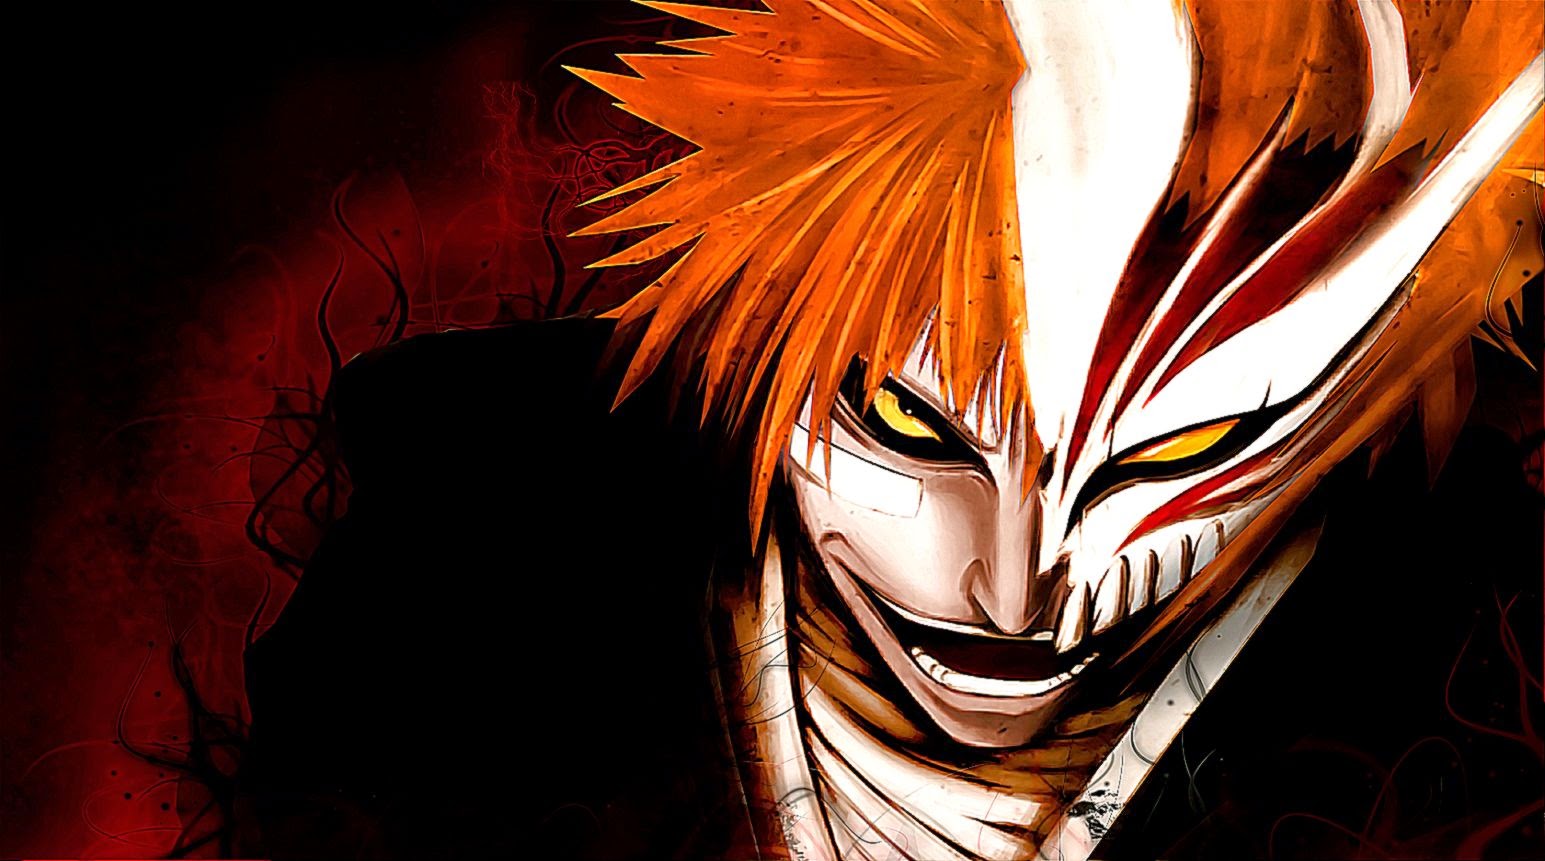 Ichigo wallpapers for 4k, 1080p hd and 720p hd resolutions and are best sui...